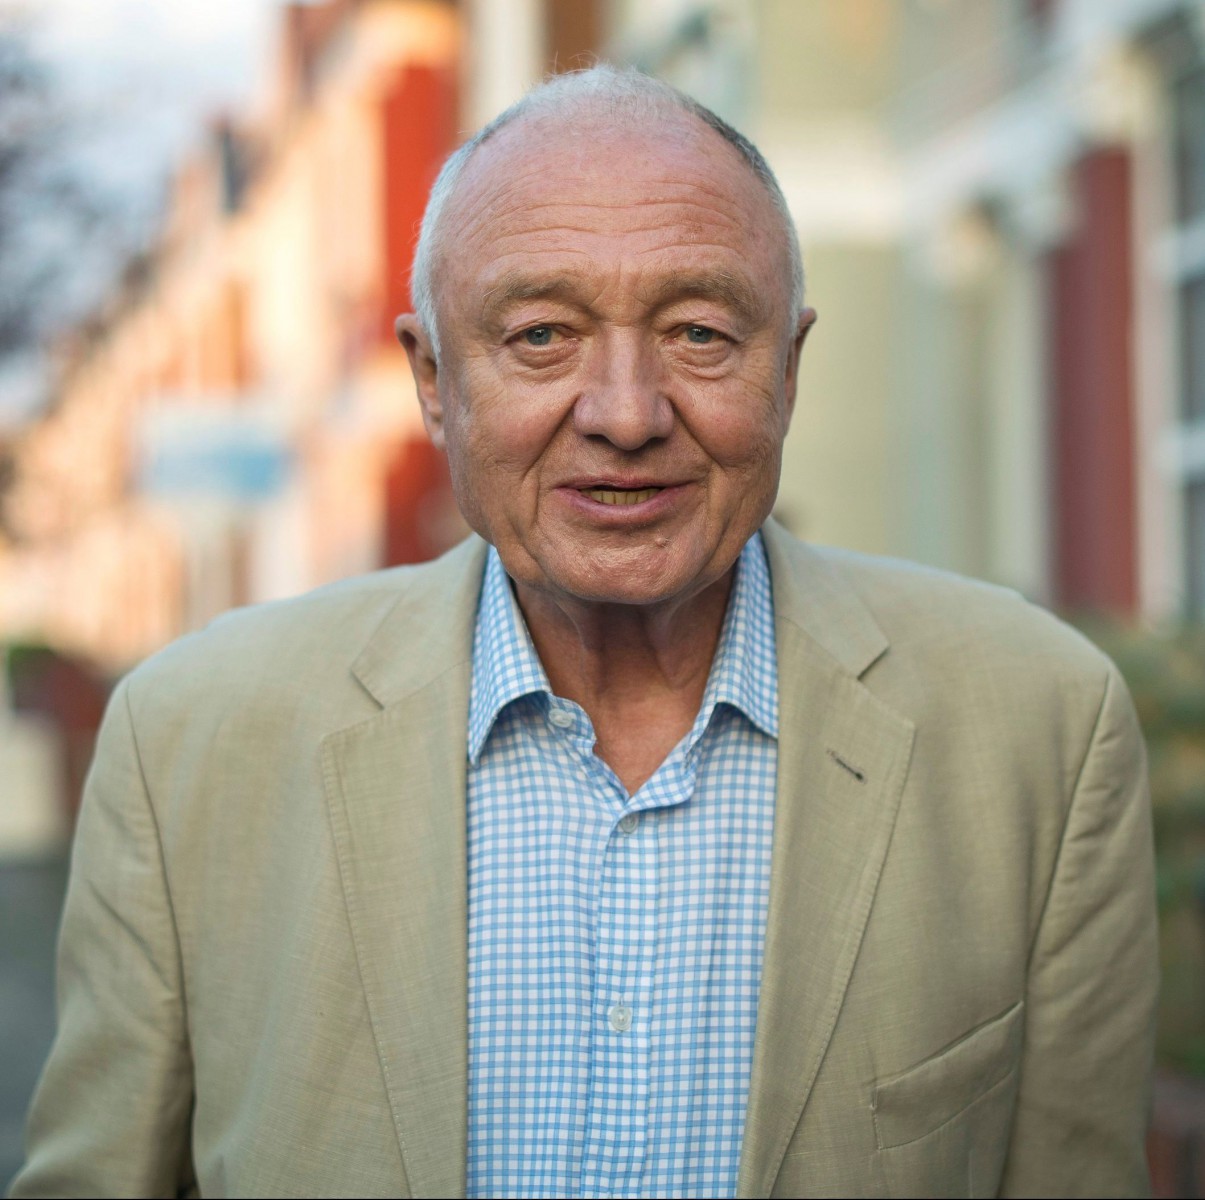 Calls for Ken Livingstone to be expelled were allegedly dismissed by senior members of Mr Corbyns team